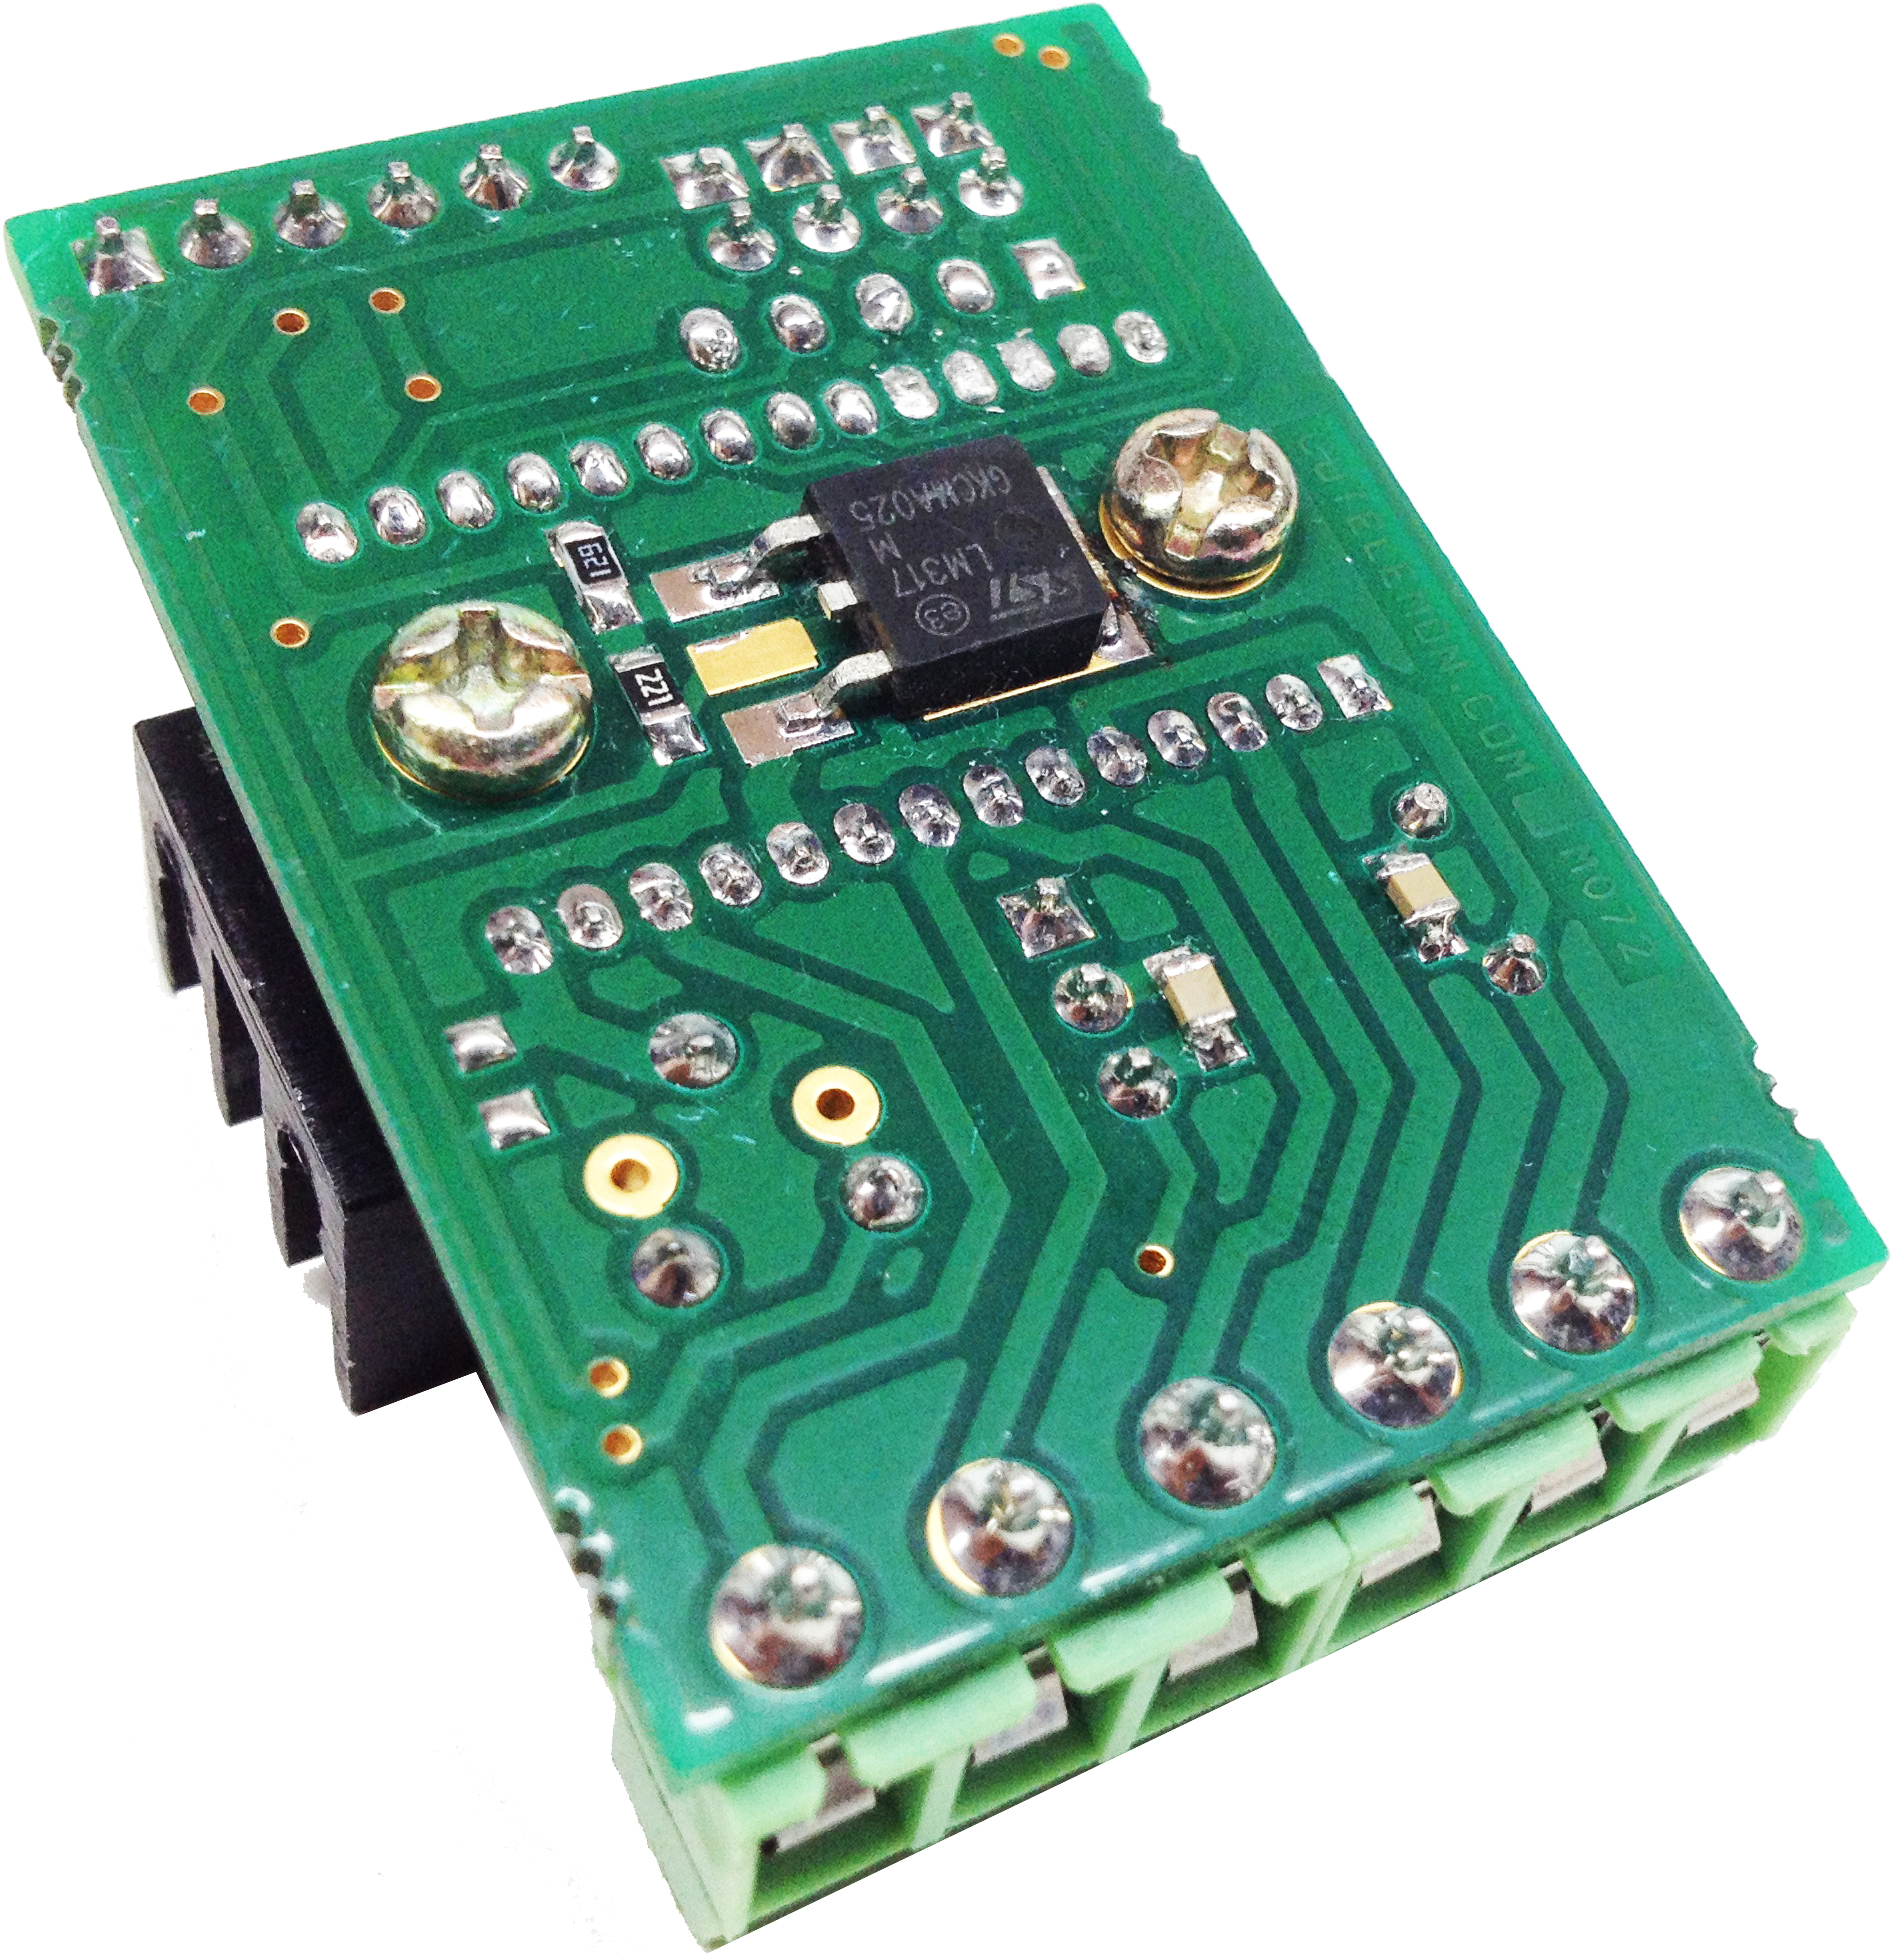 2.5A Bipolar Stepper Motor Driver with Micro-Steppeing Using LV8772 (4)